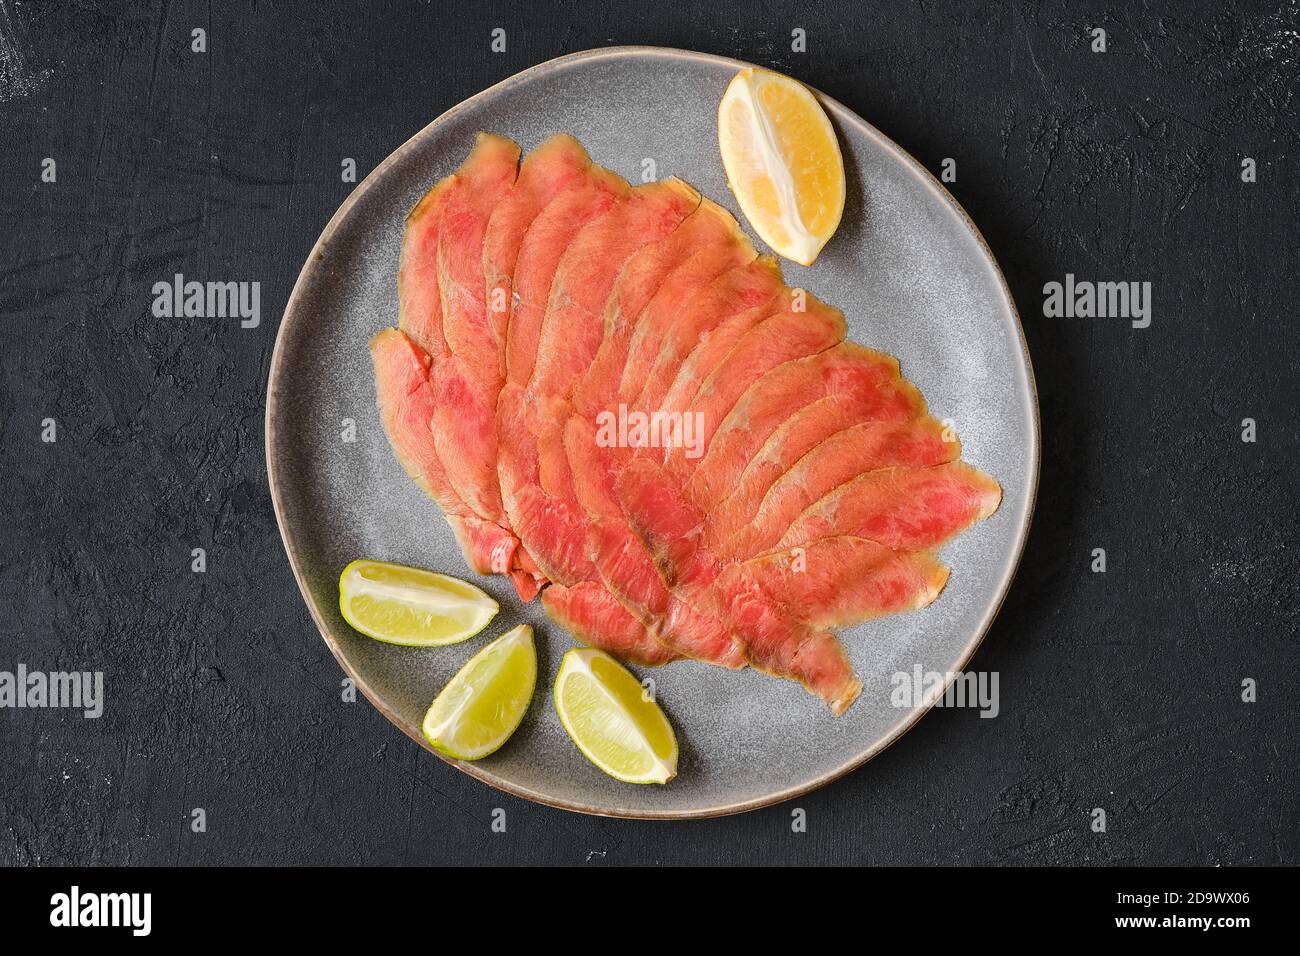 https://c8.alamy.com/comp/2D9WX06/top-view-of-smoked-thin-slices-of-salmon-fillet-2D9WX06.jpg